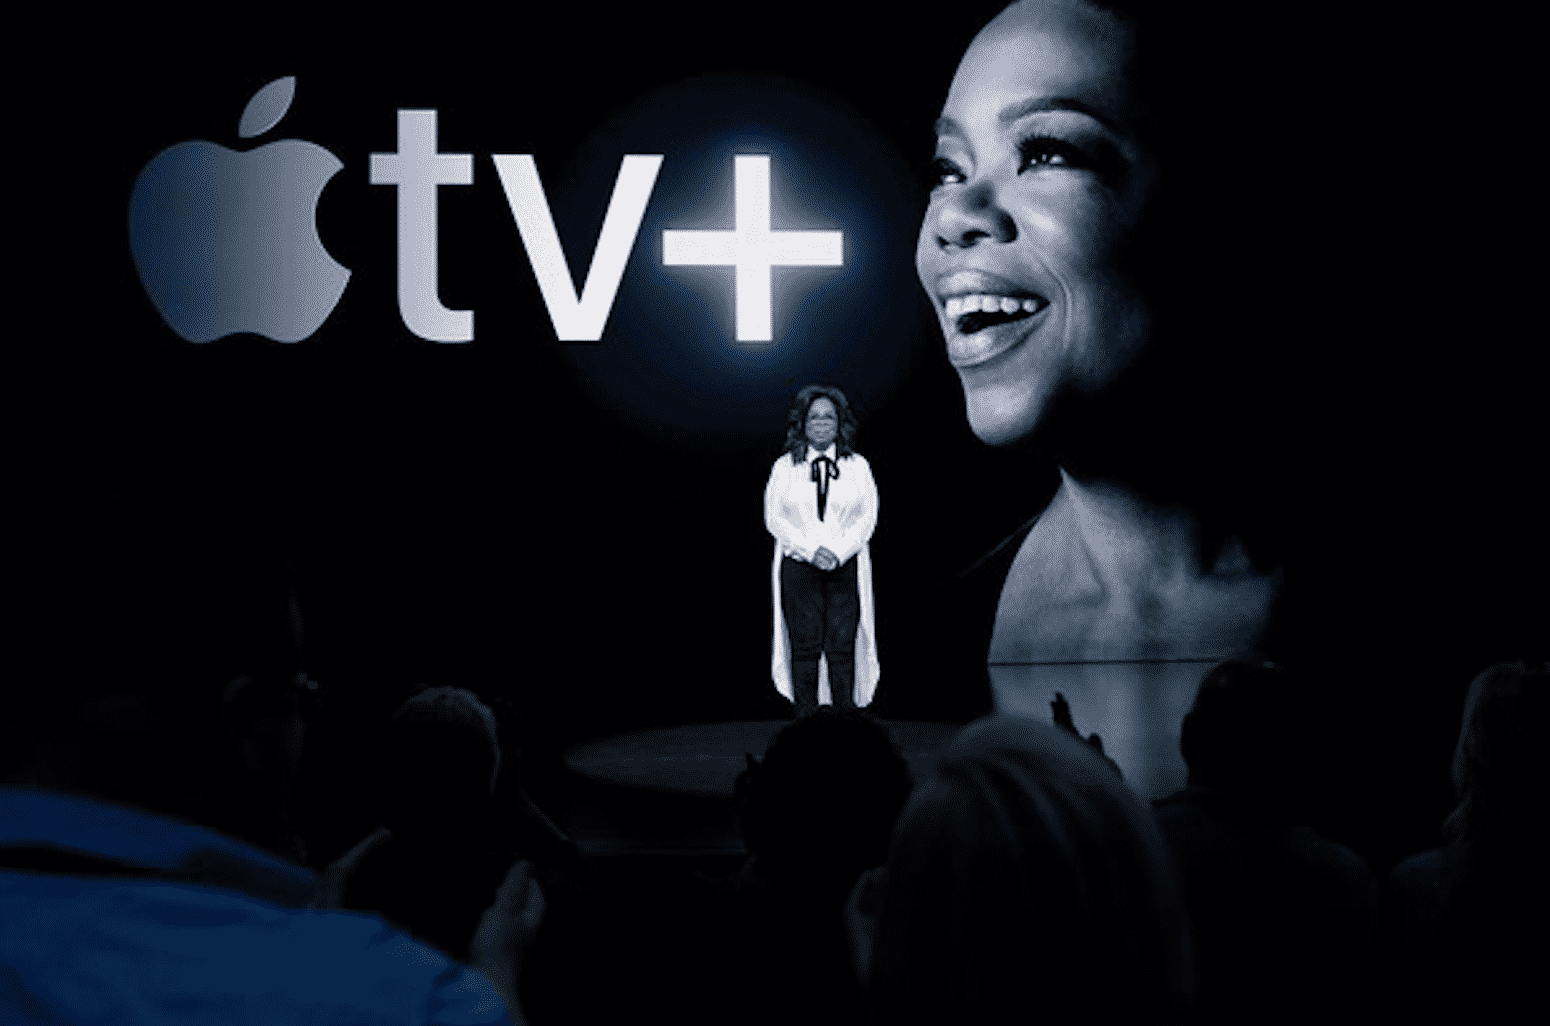 Misconduct Documentary Dropped by Oprah and Apple TV+